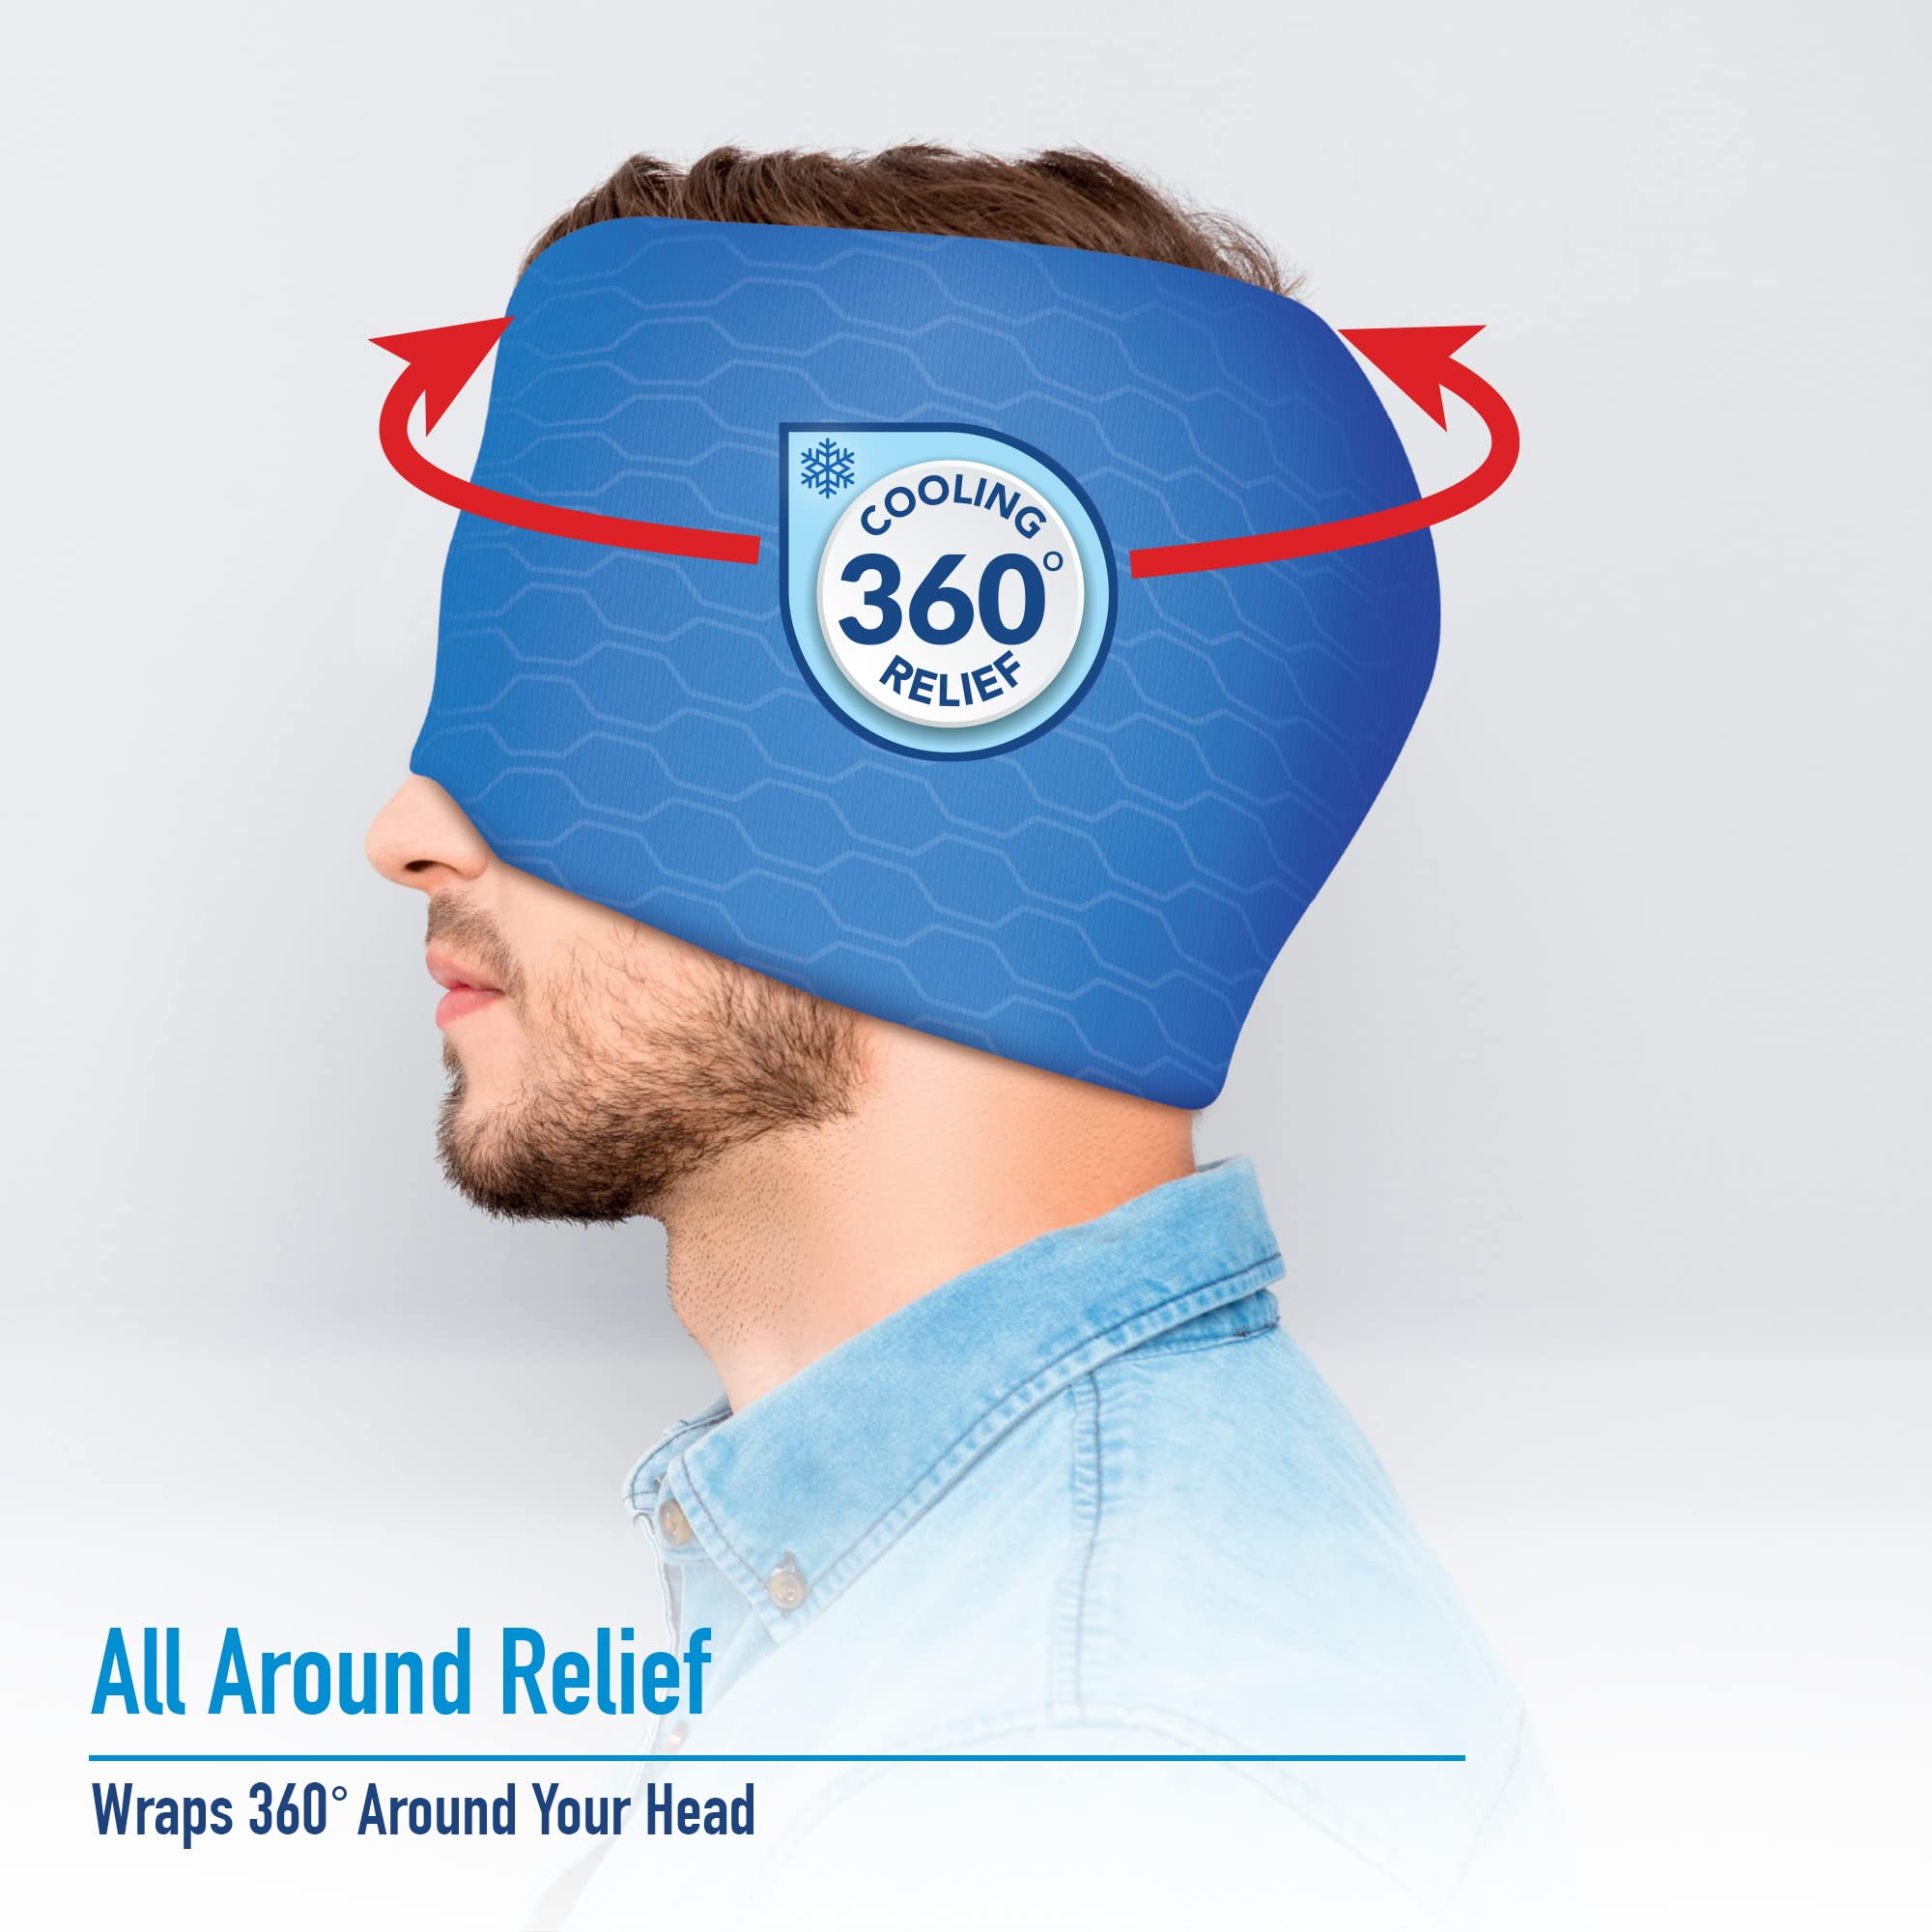 Ontel Miracle Headache Relief Wrap - Light Blocking Cap and Sleeping Mask with Cooling Gel & Compression